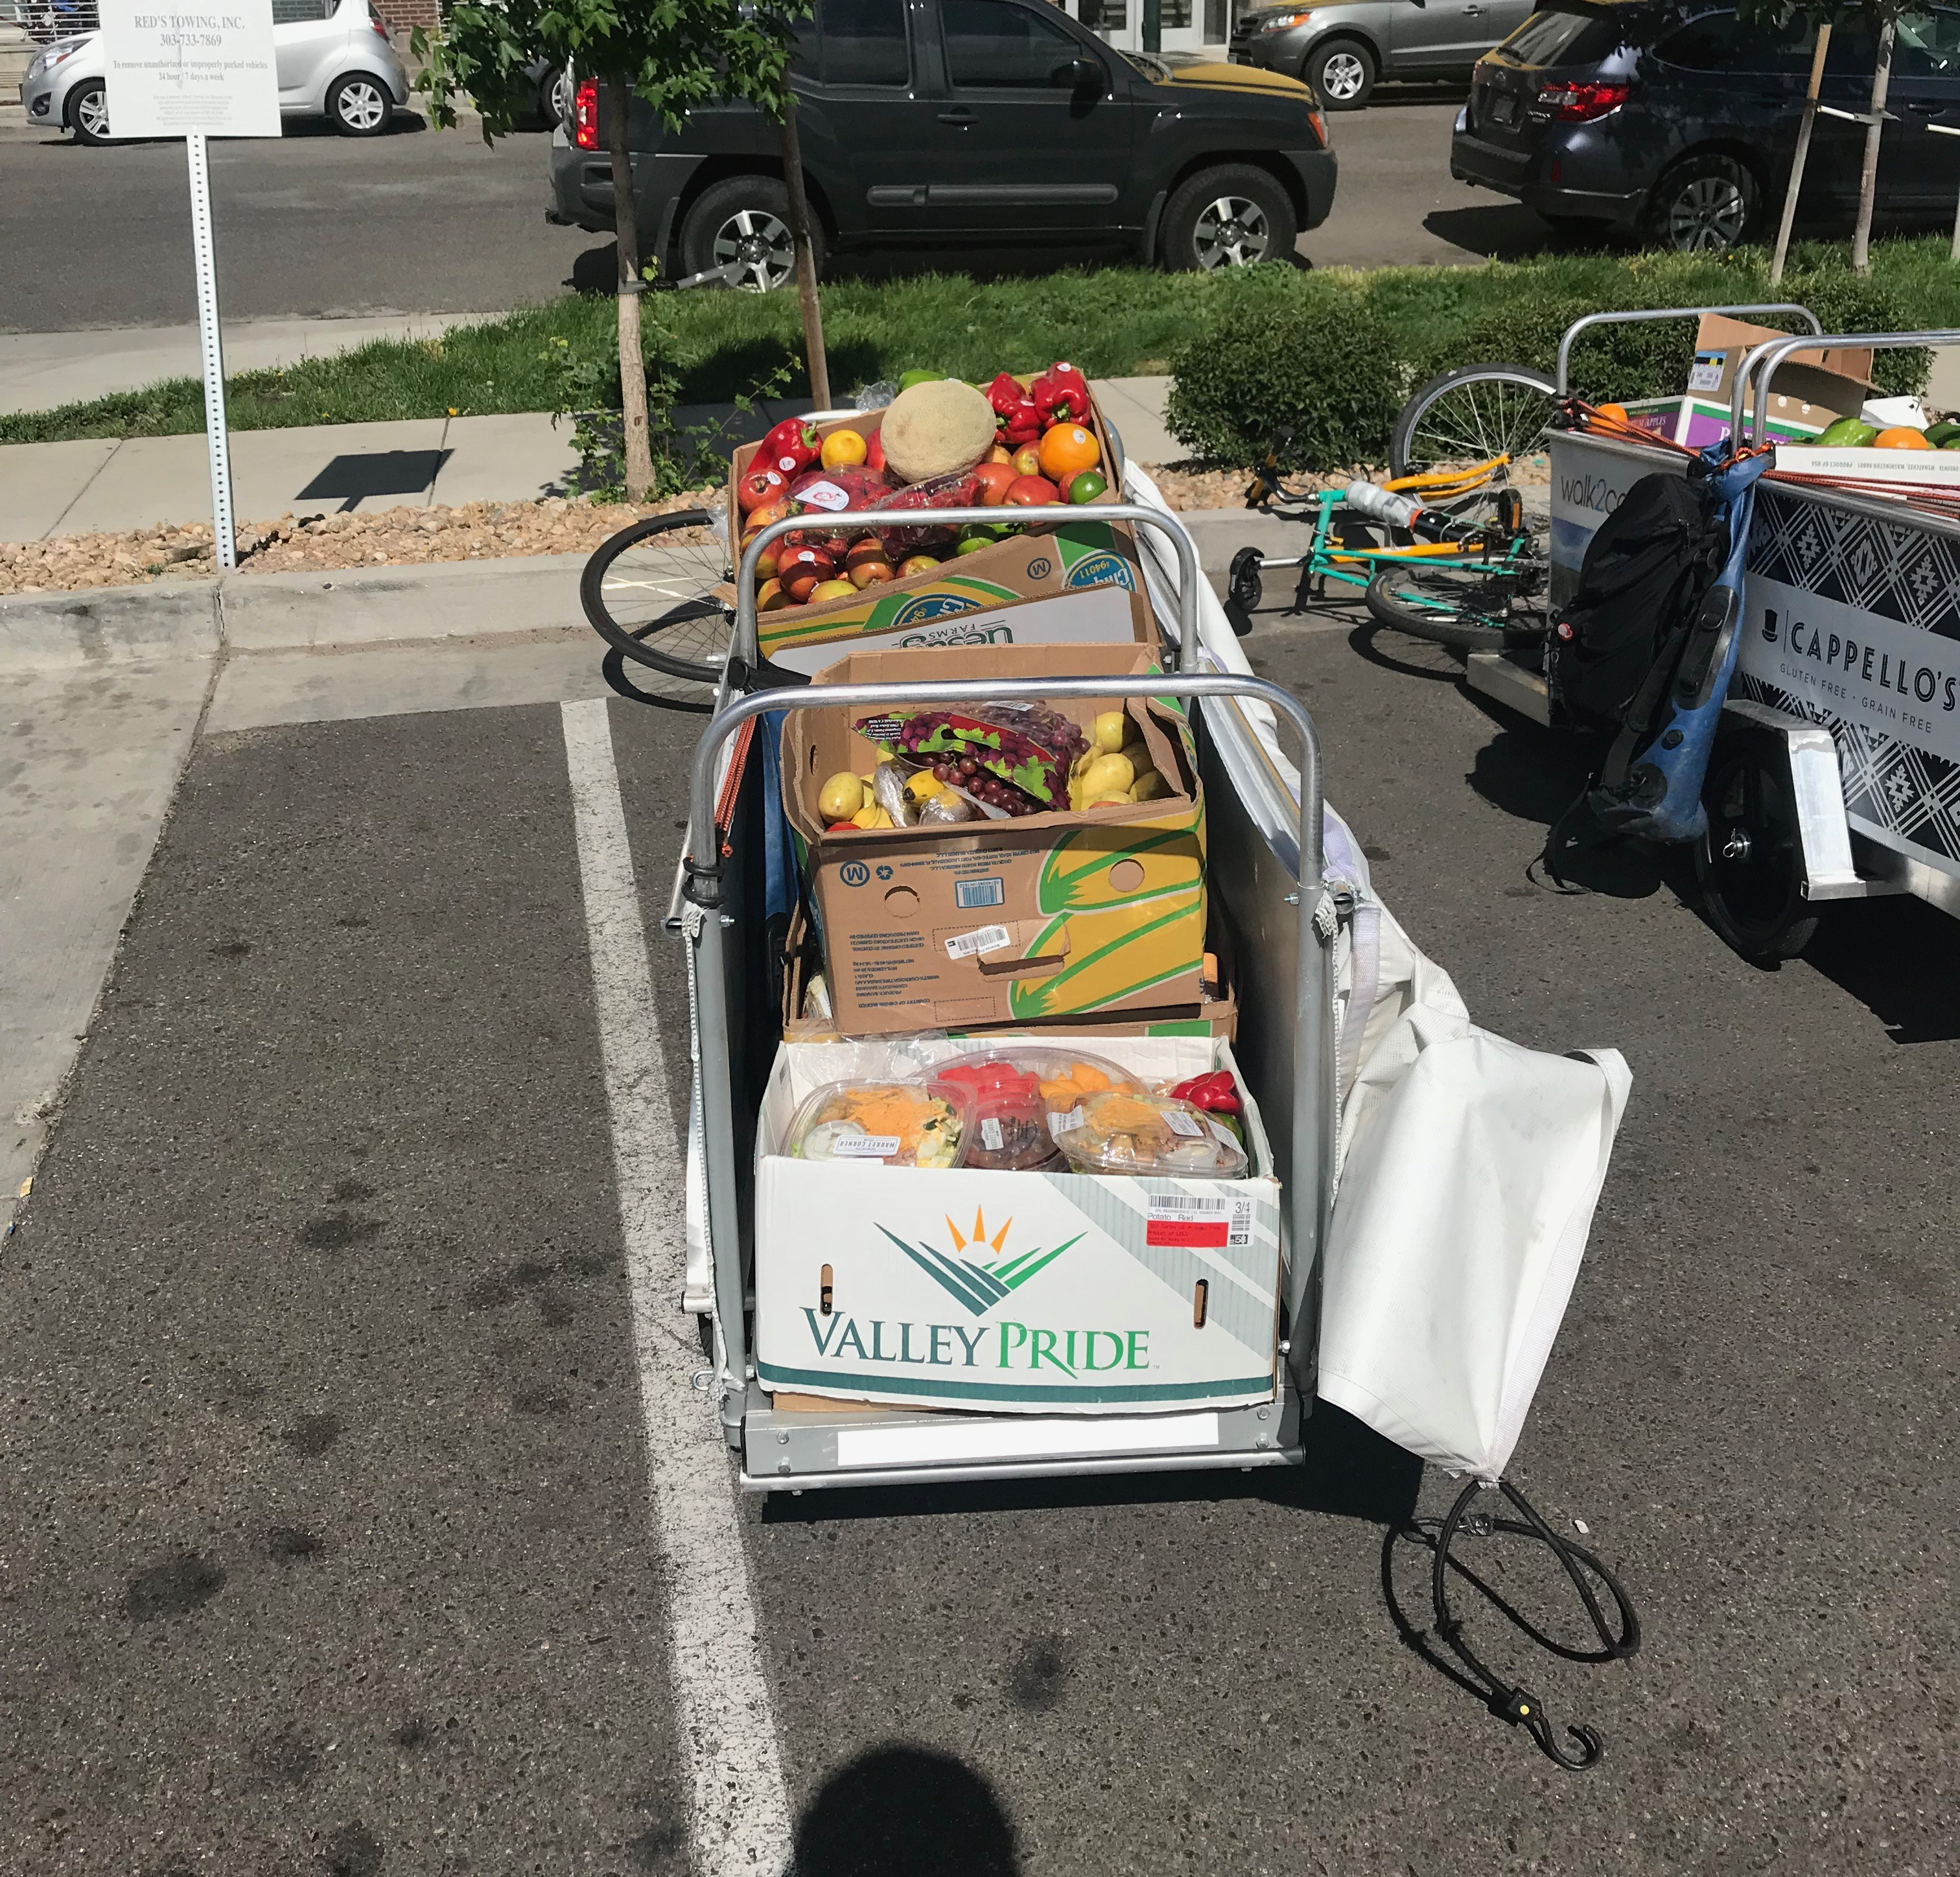 A long bike trailer loaded with groceries